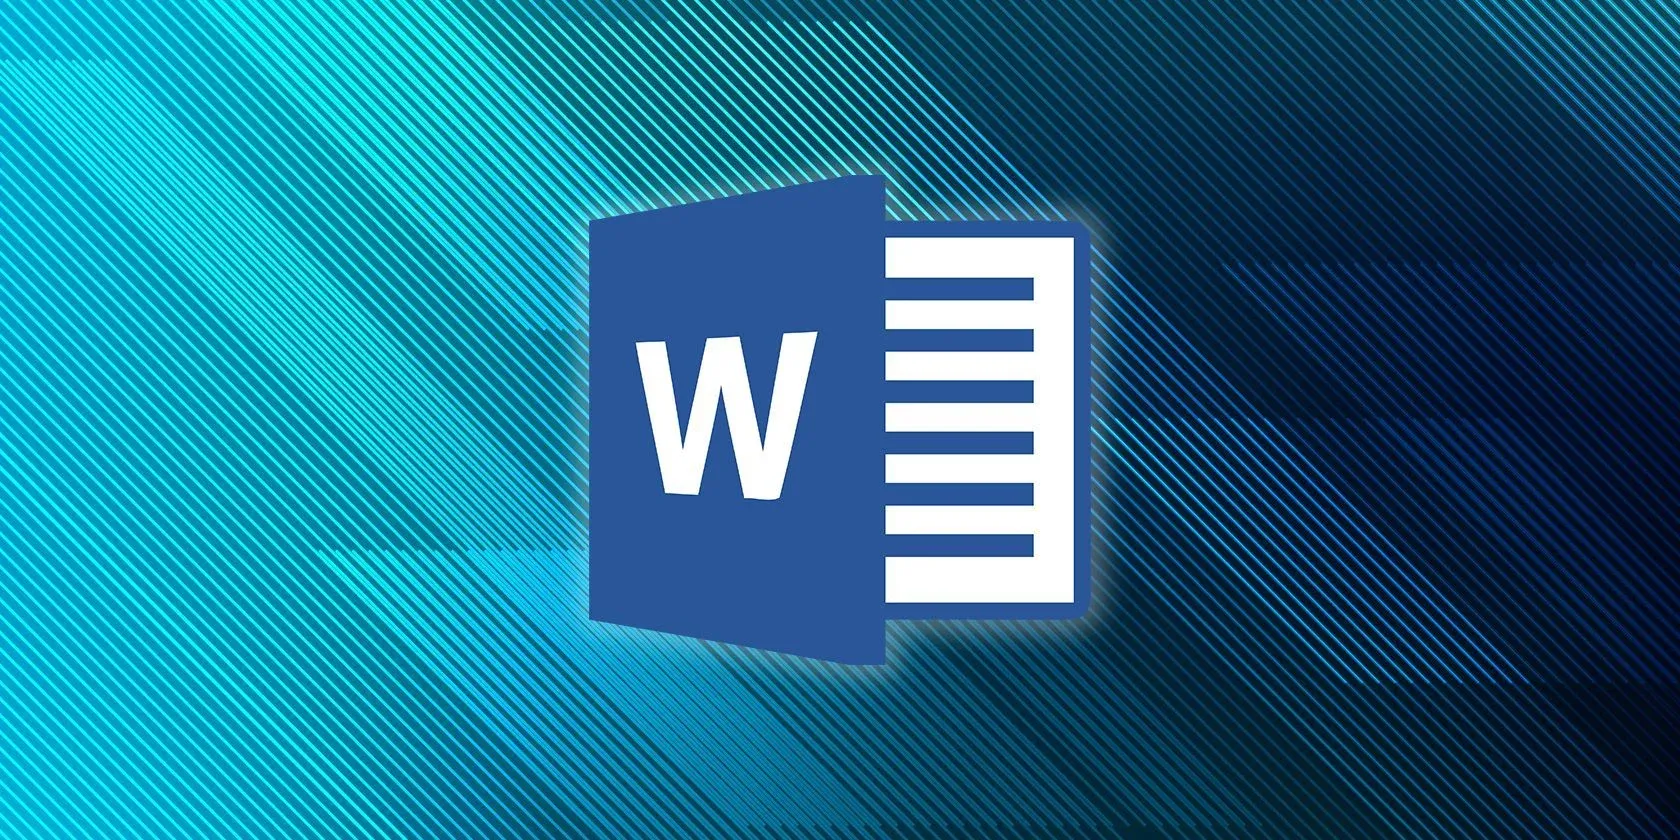 How to Change Line Spacing in Word